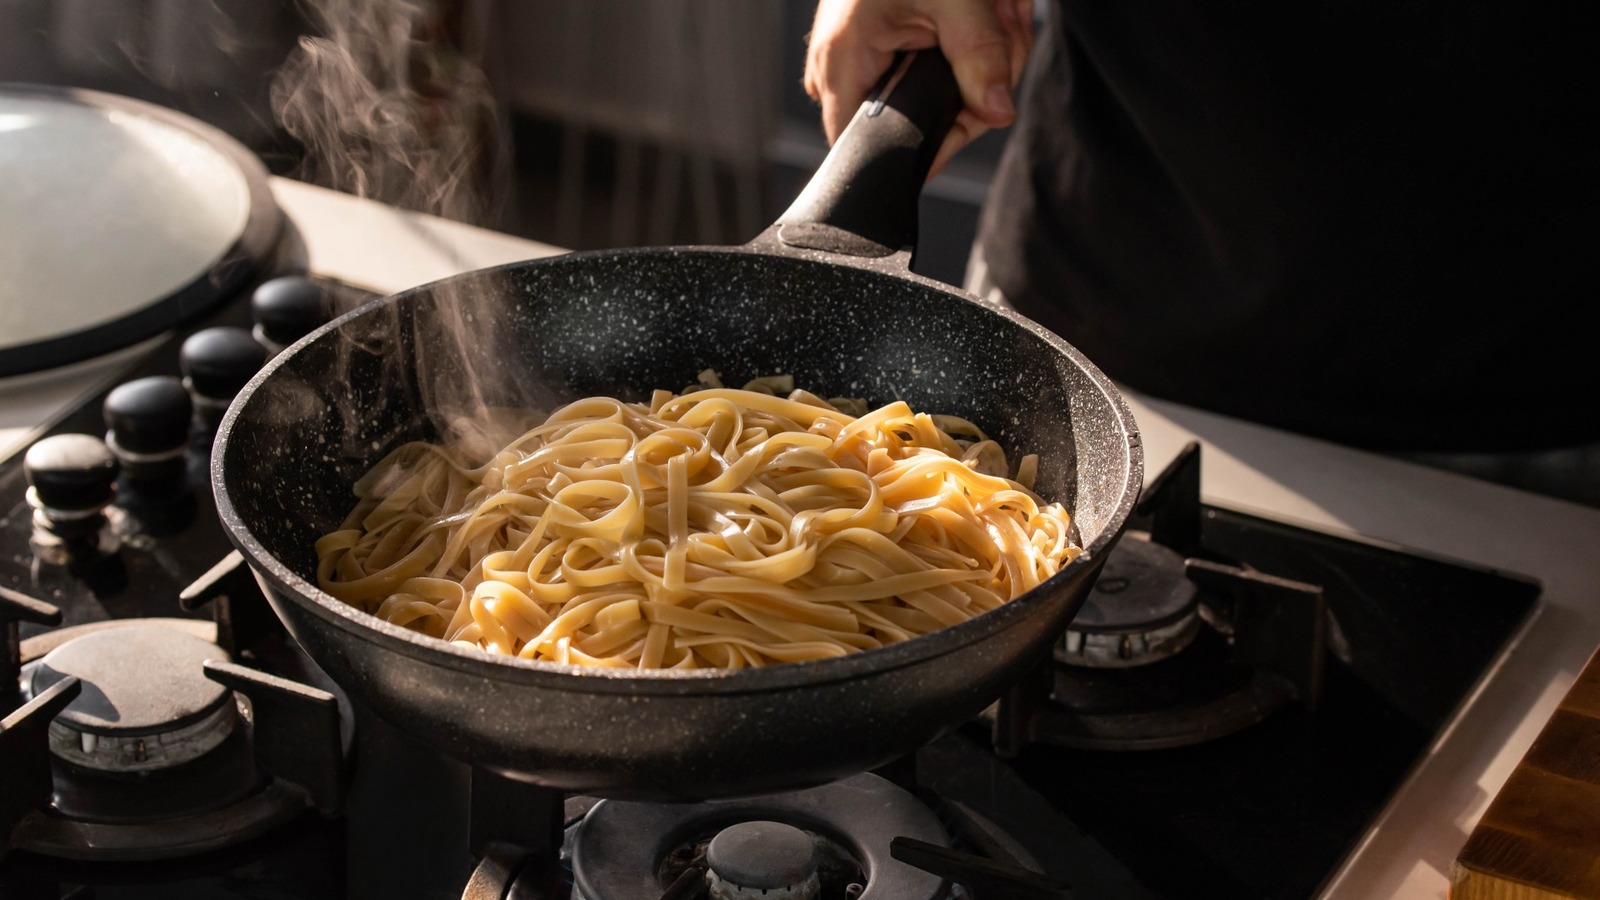 https://www.tastingtable.com/img/gallery/boil-noodles-in-a-shallow-pan-for-a-time-saving-pasta-hack/l-intro-1699538320.jpg